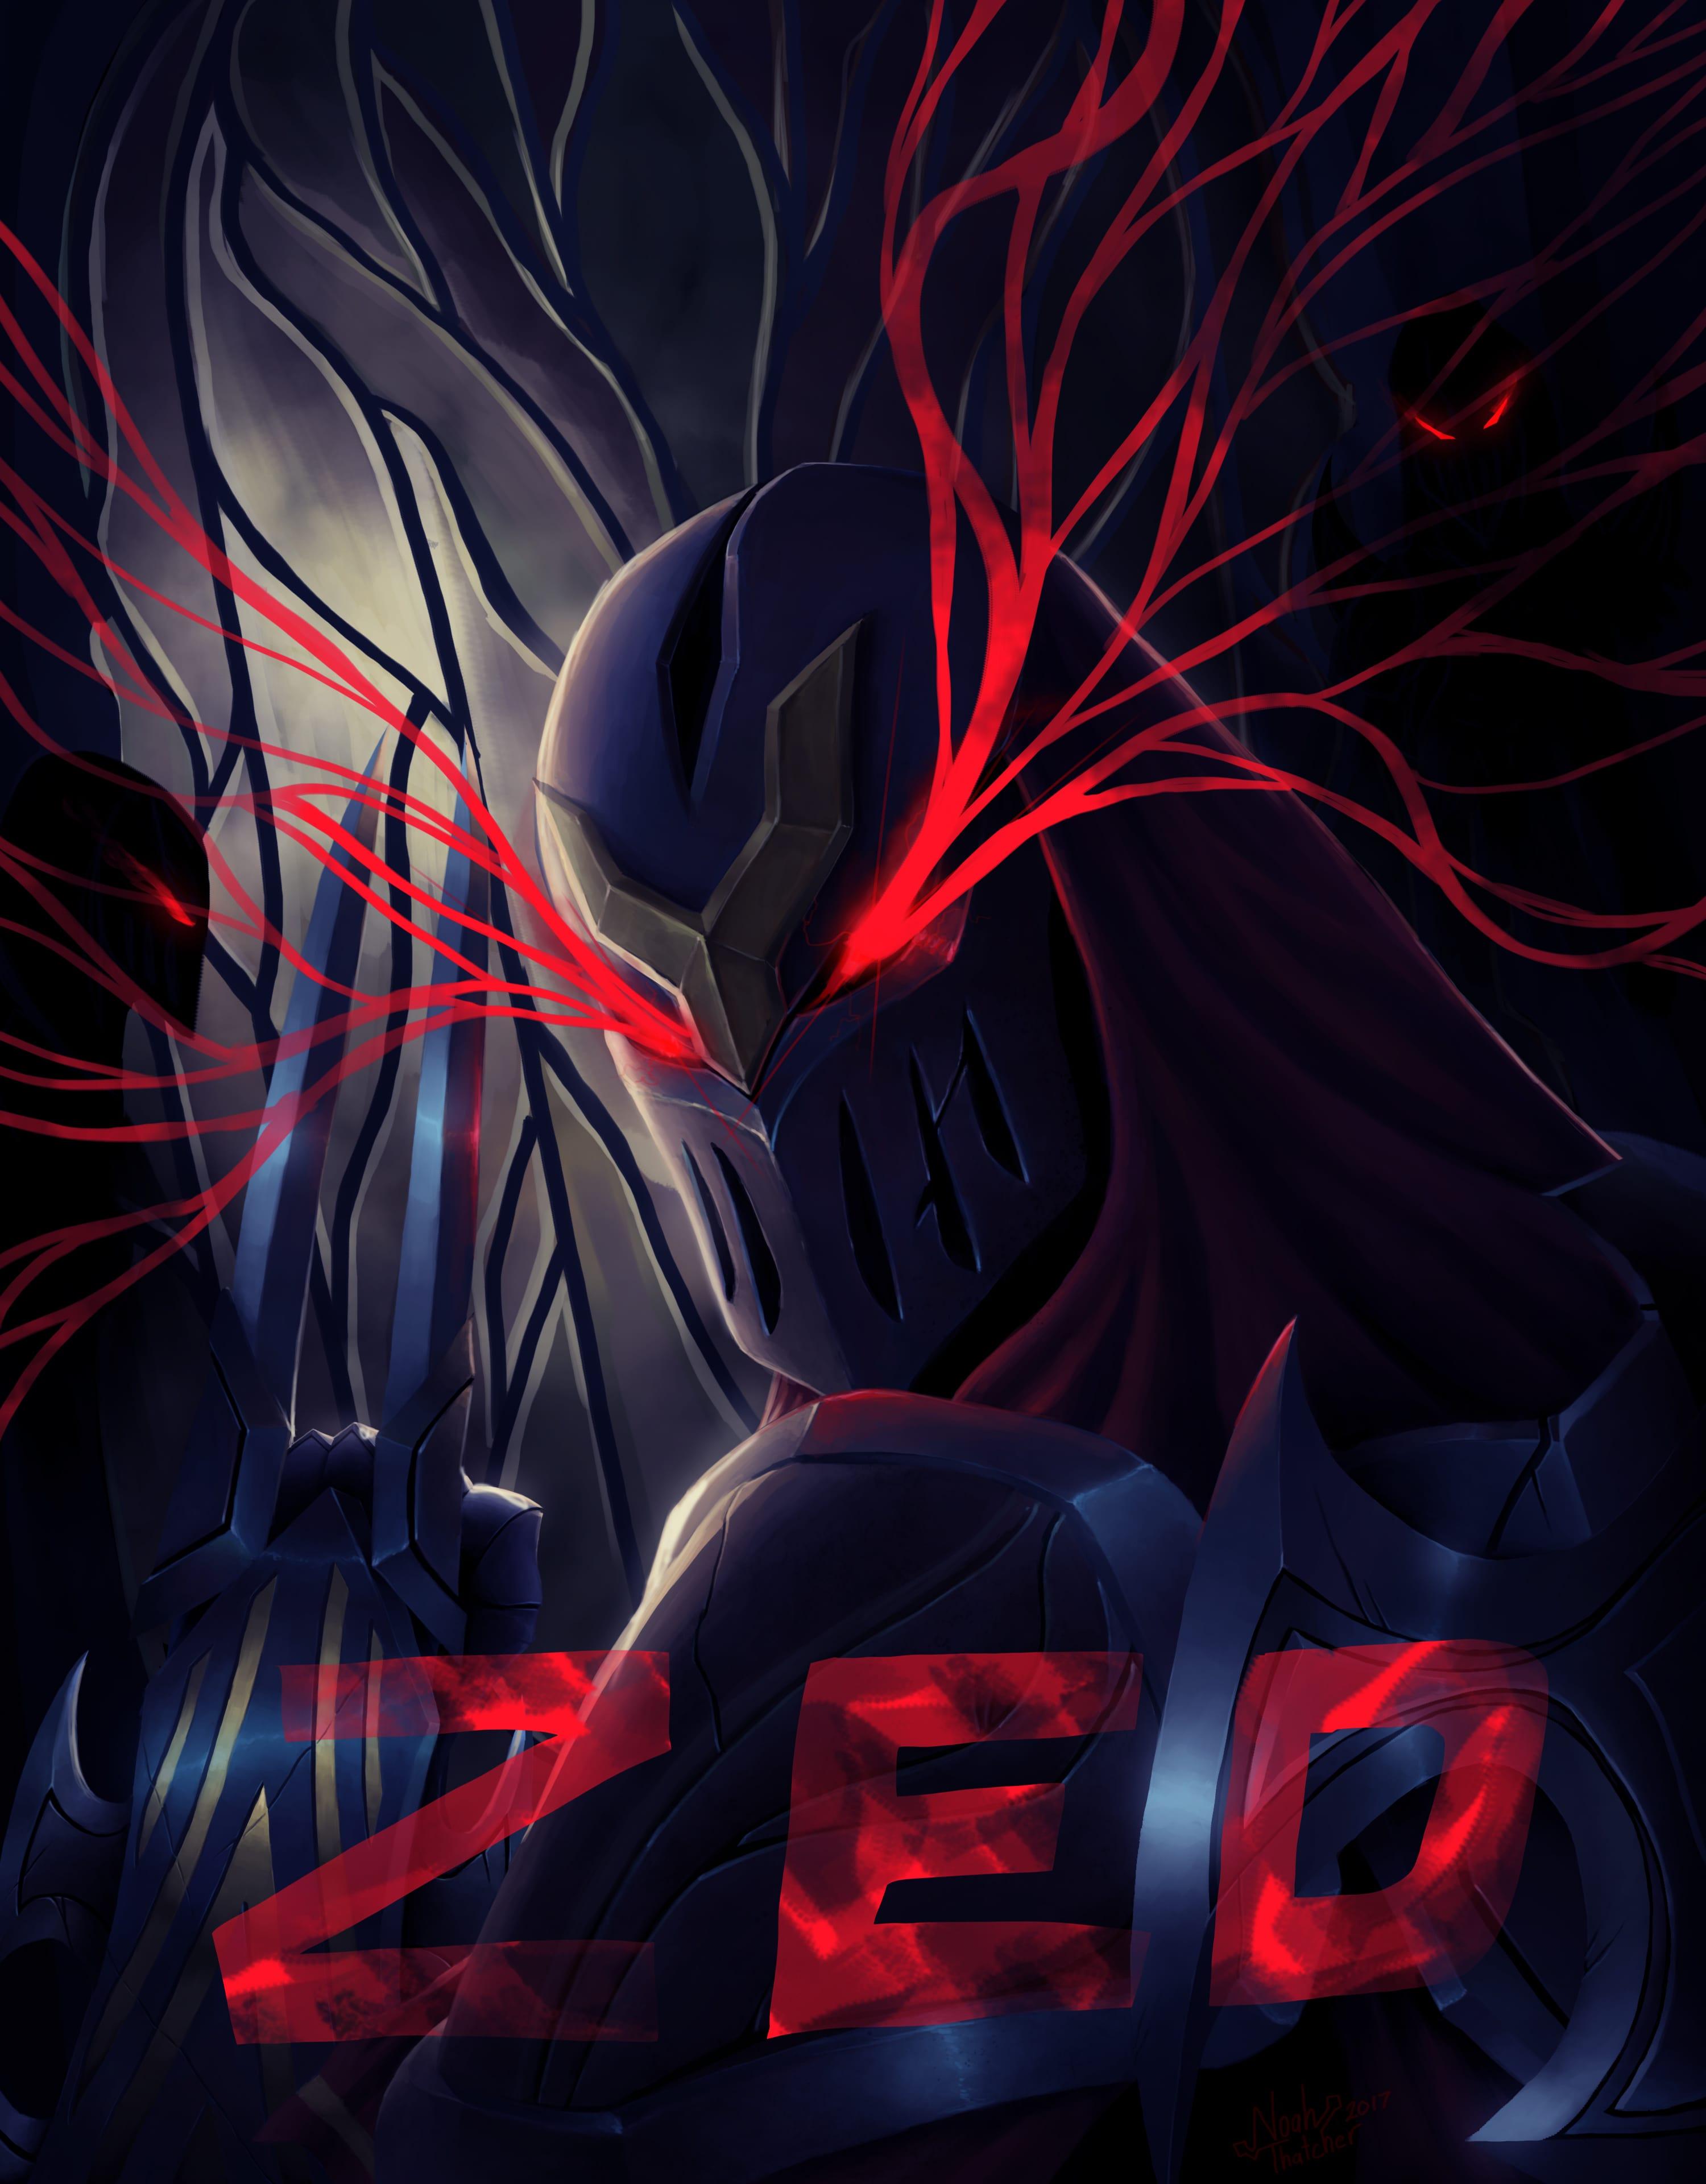 zed reaper of shadows by thearkon Wallpaper and Free Stock